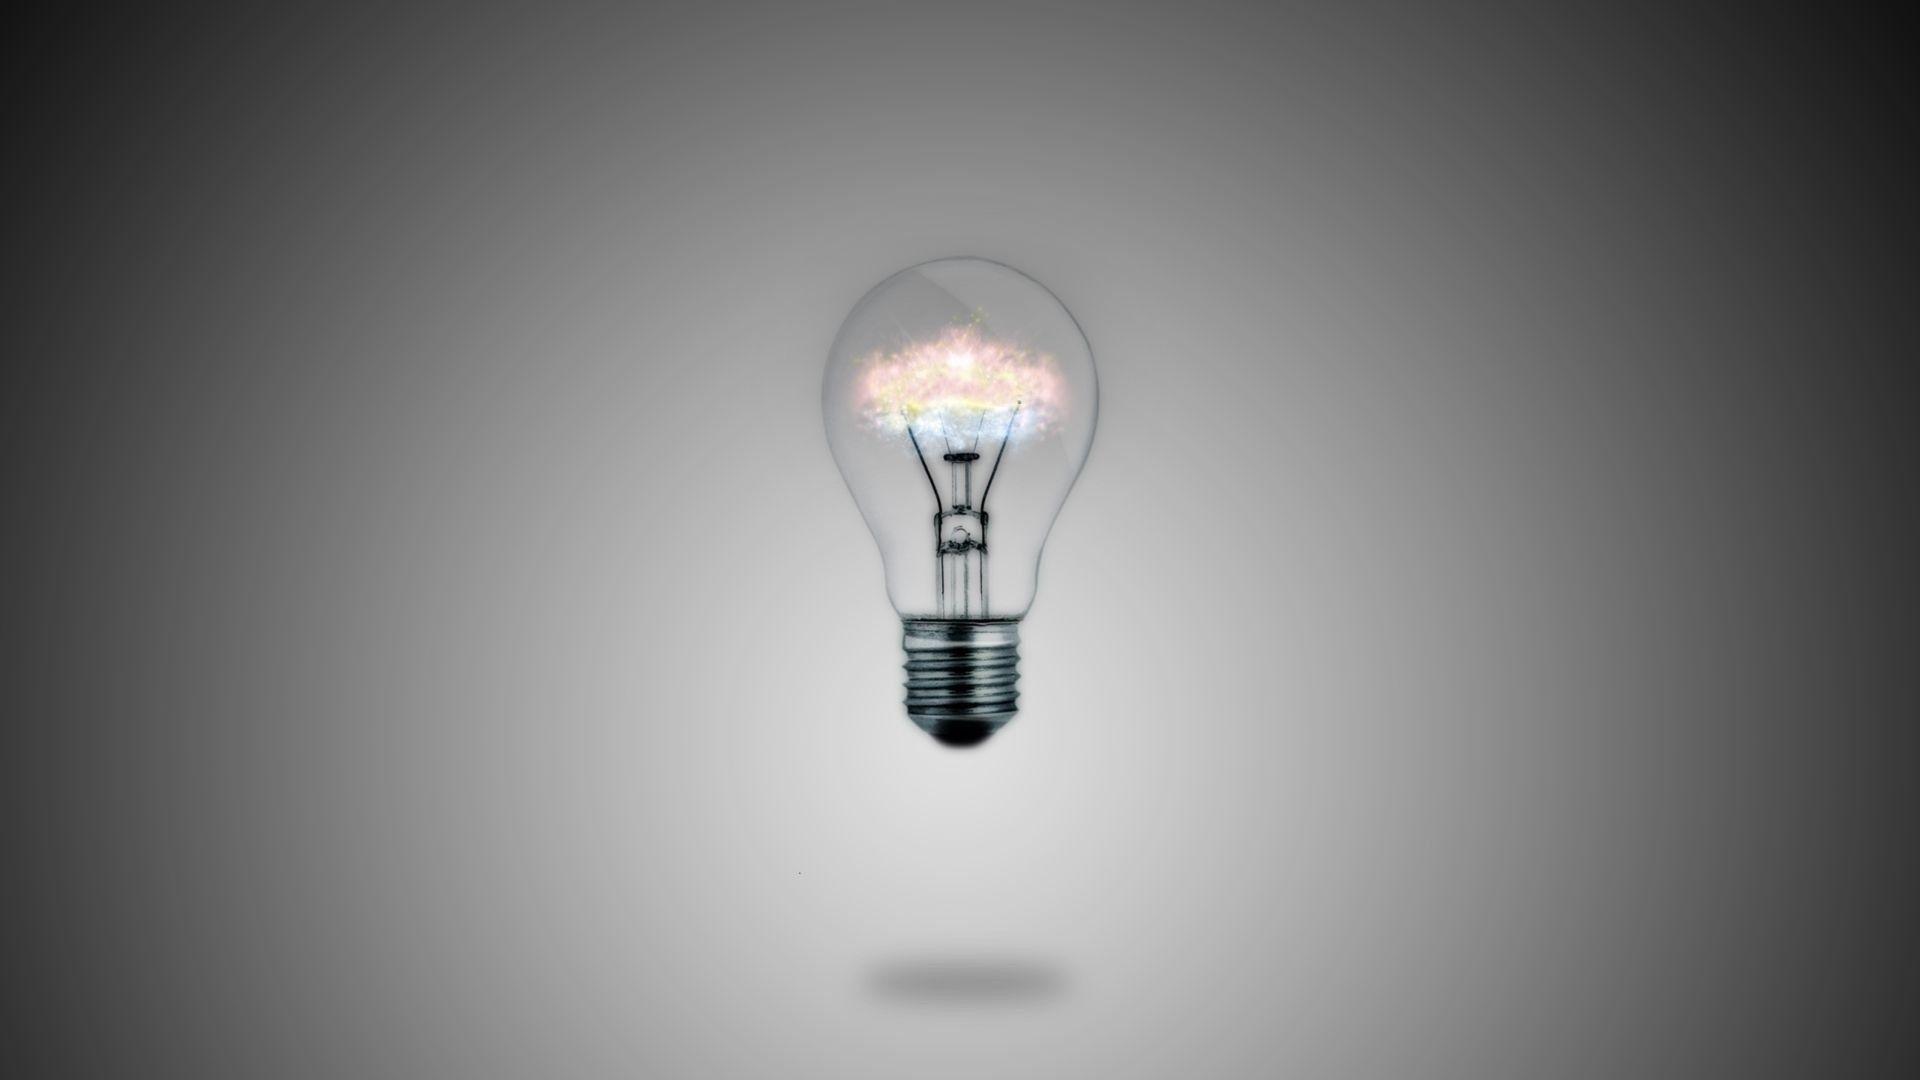 Light bulb wallpaper, picture with bulbs